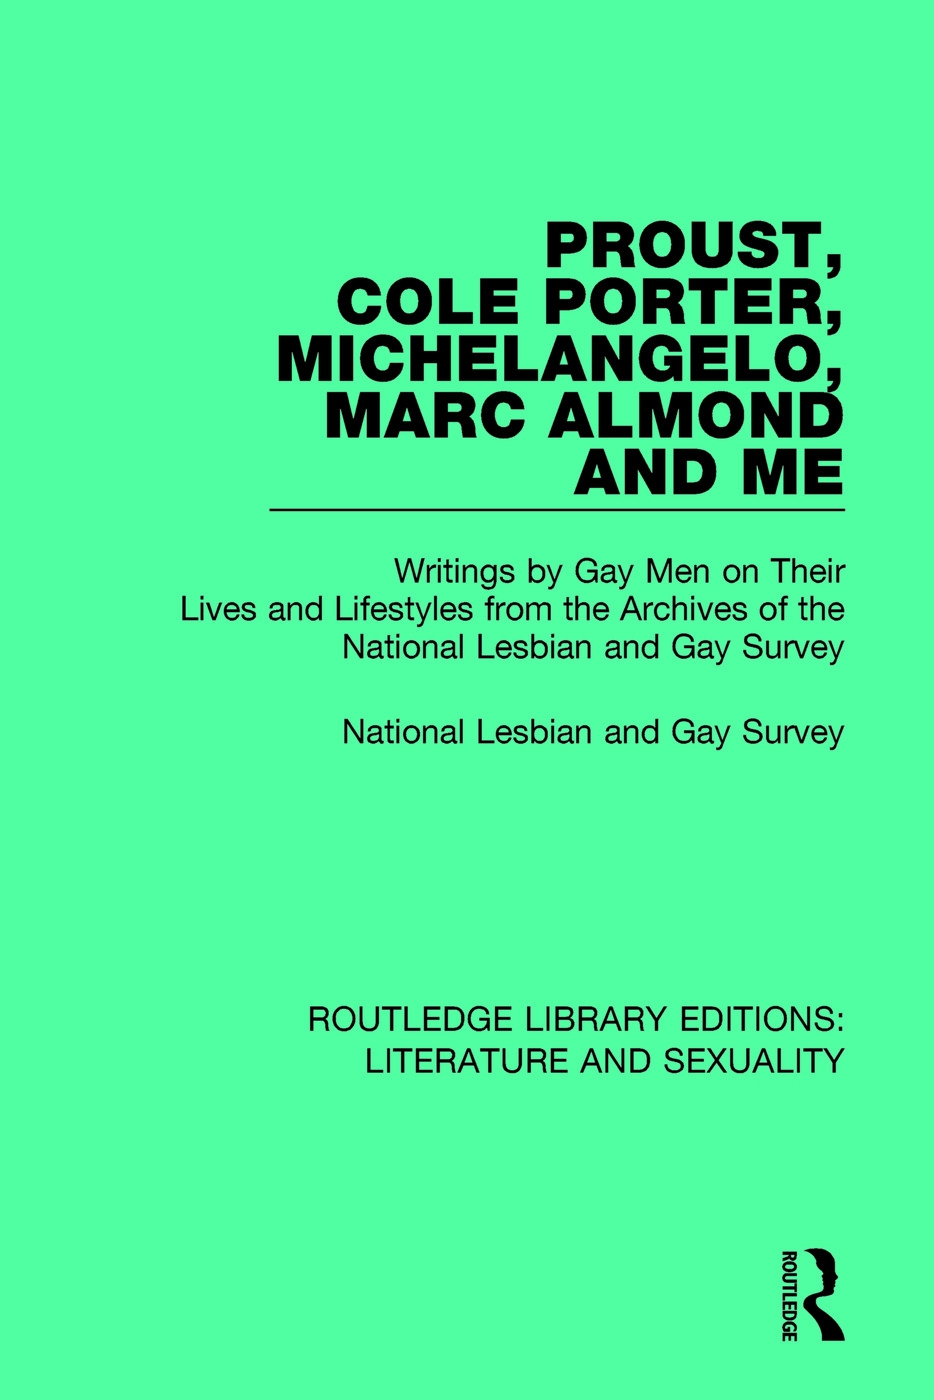 Proust, Cole Porter, Michelangelo, Marc Almond and Me: Writings by Gay Men on Their Lives and Lifestyles from the Archives of the National Lesbian and